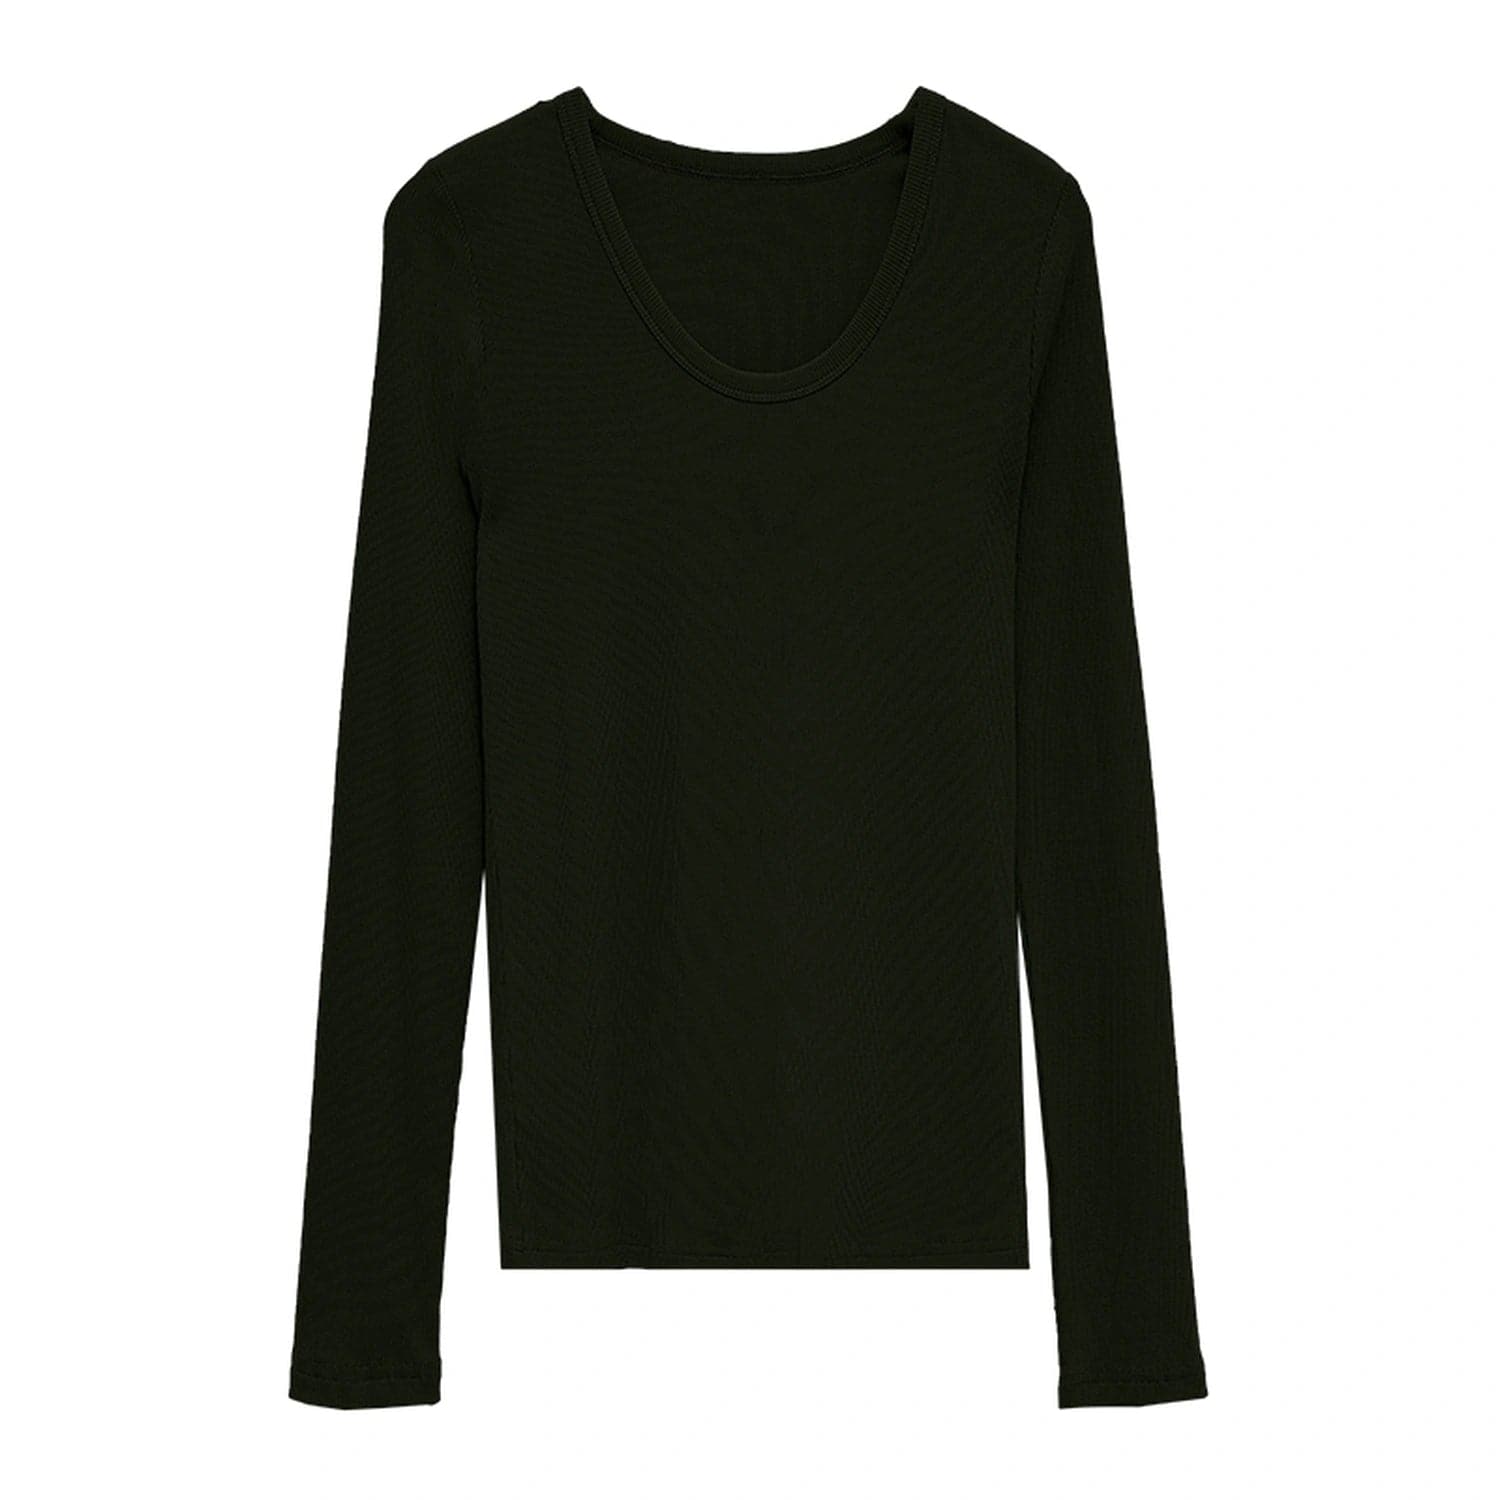 Basic Round Neck Textured Long Sleeve Knit Top